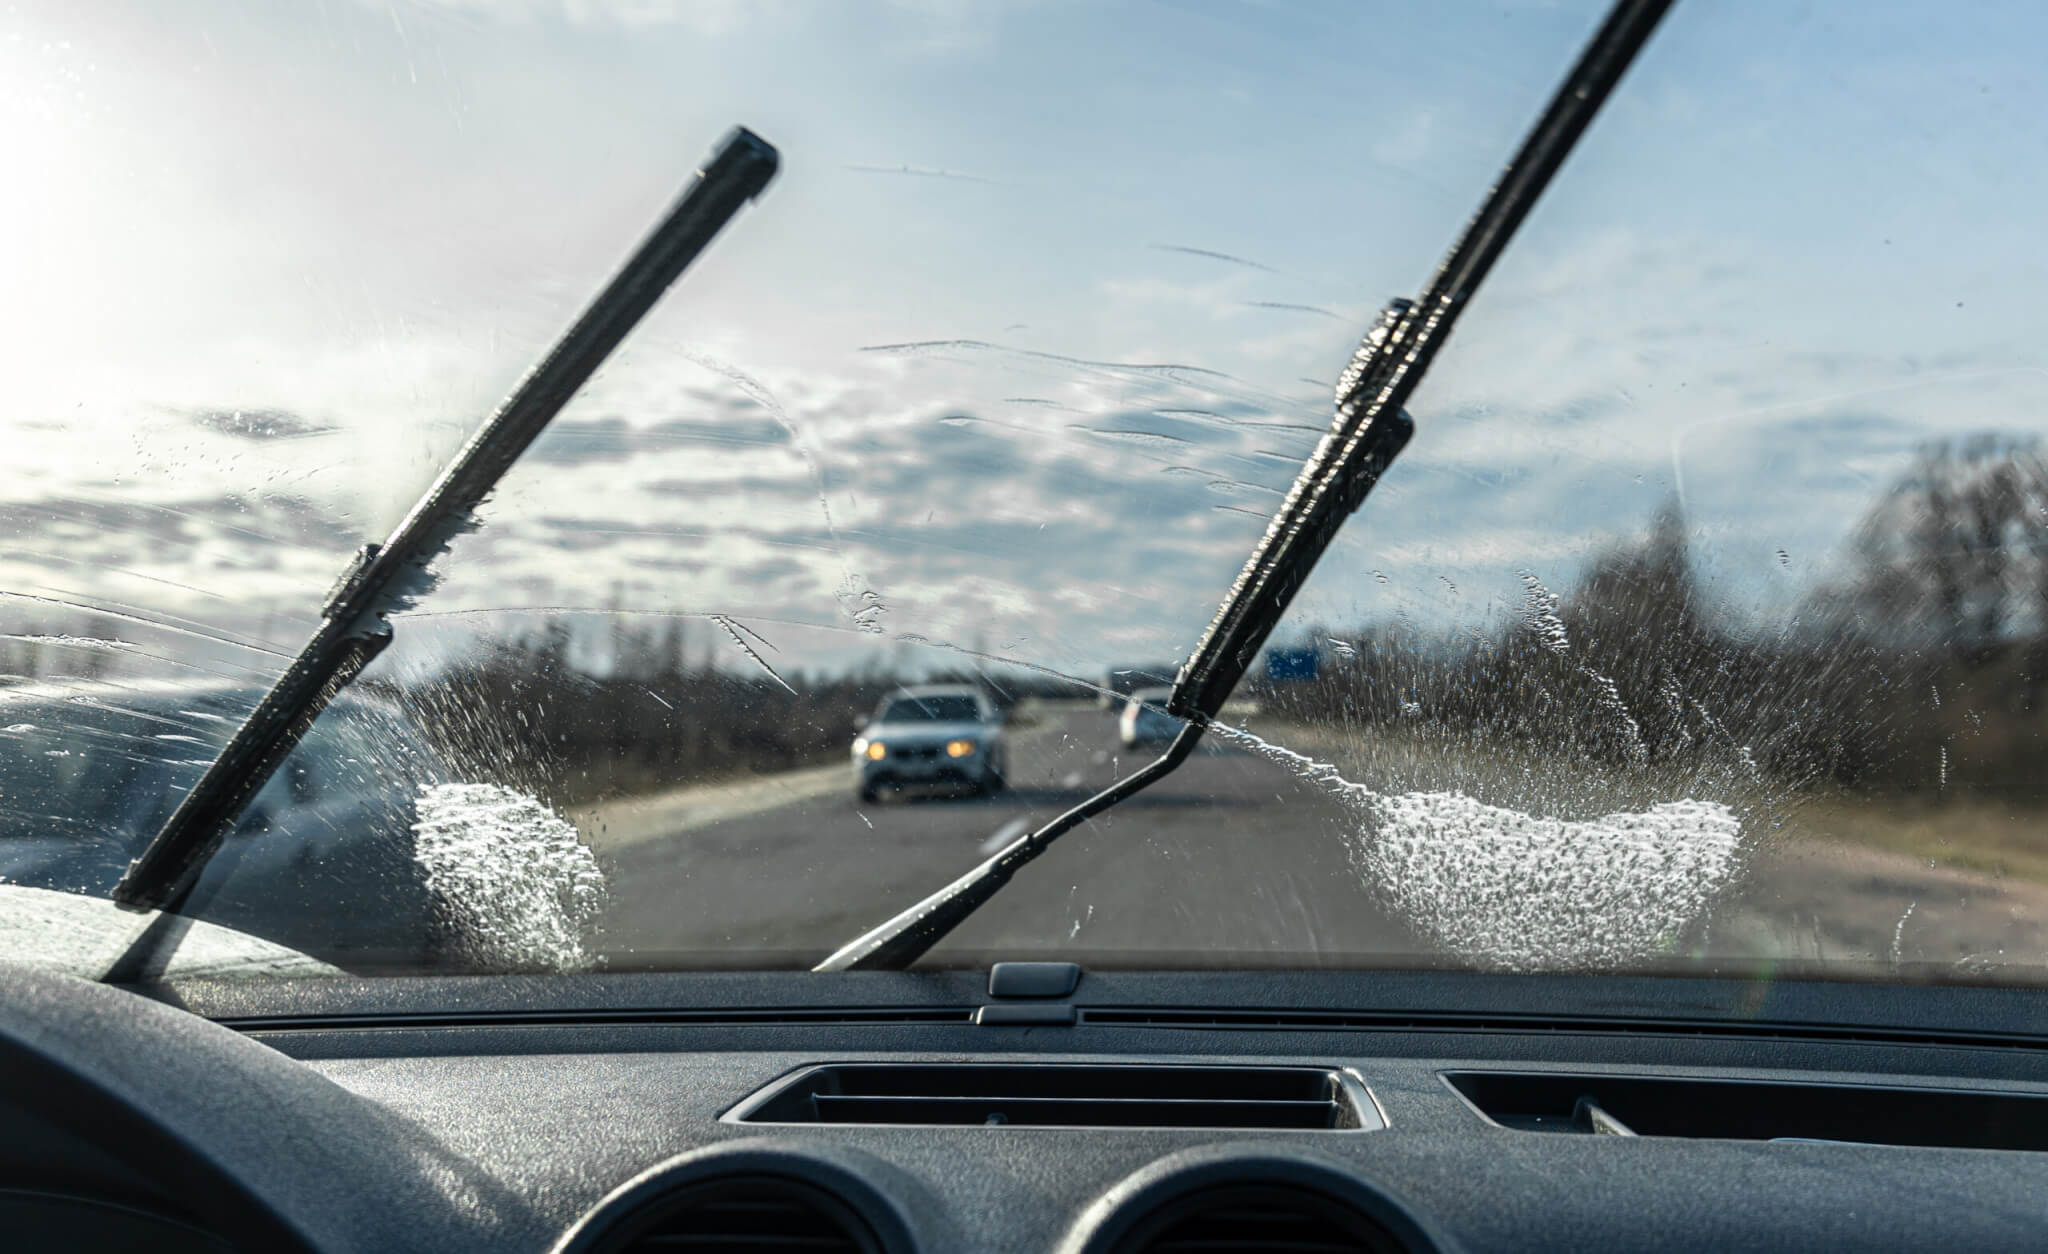 Windshield washer fluid contributes more to climate change than you think -  Study Finds